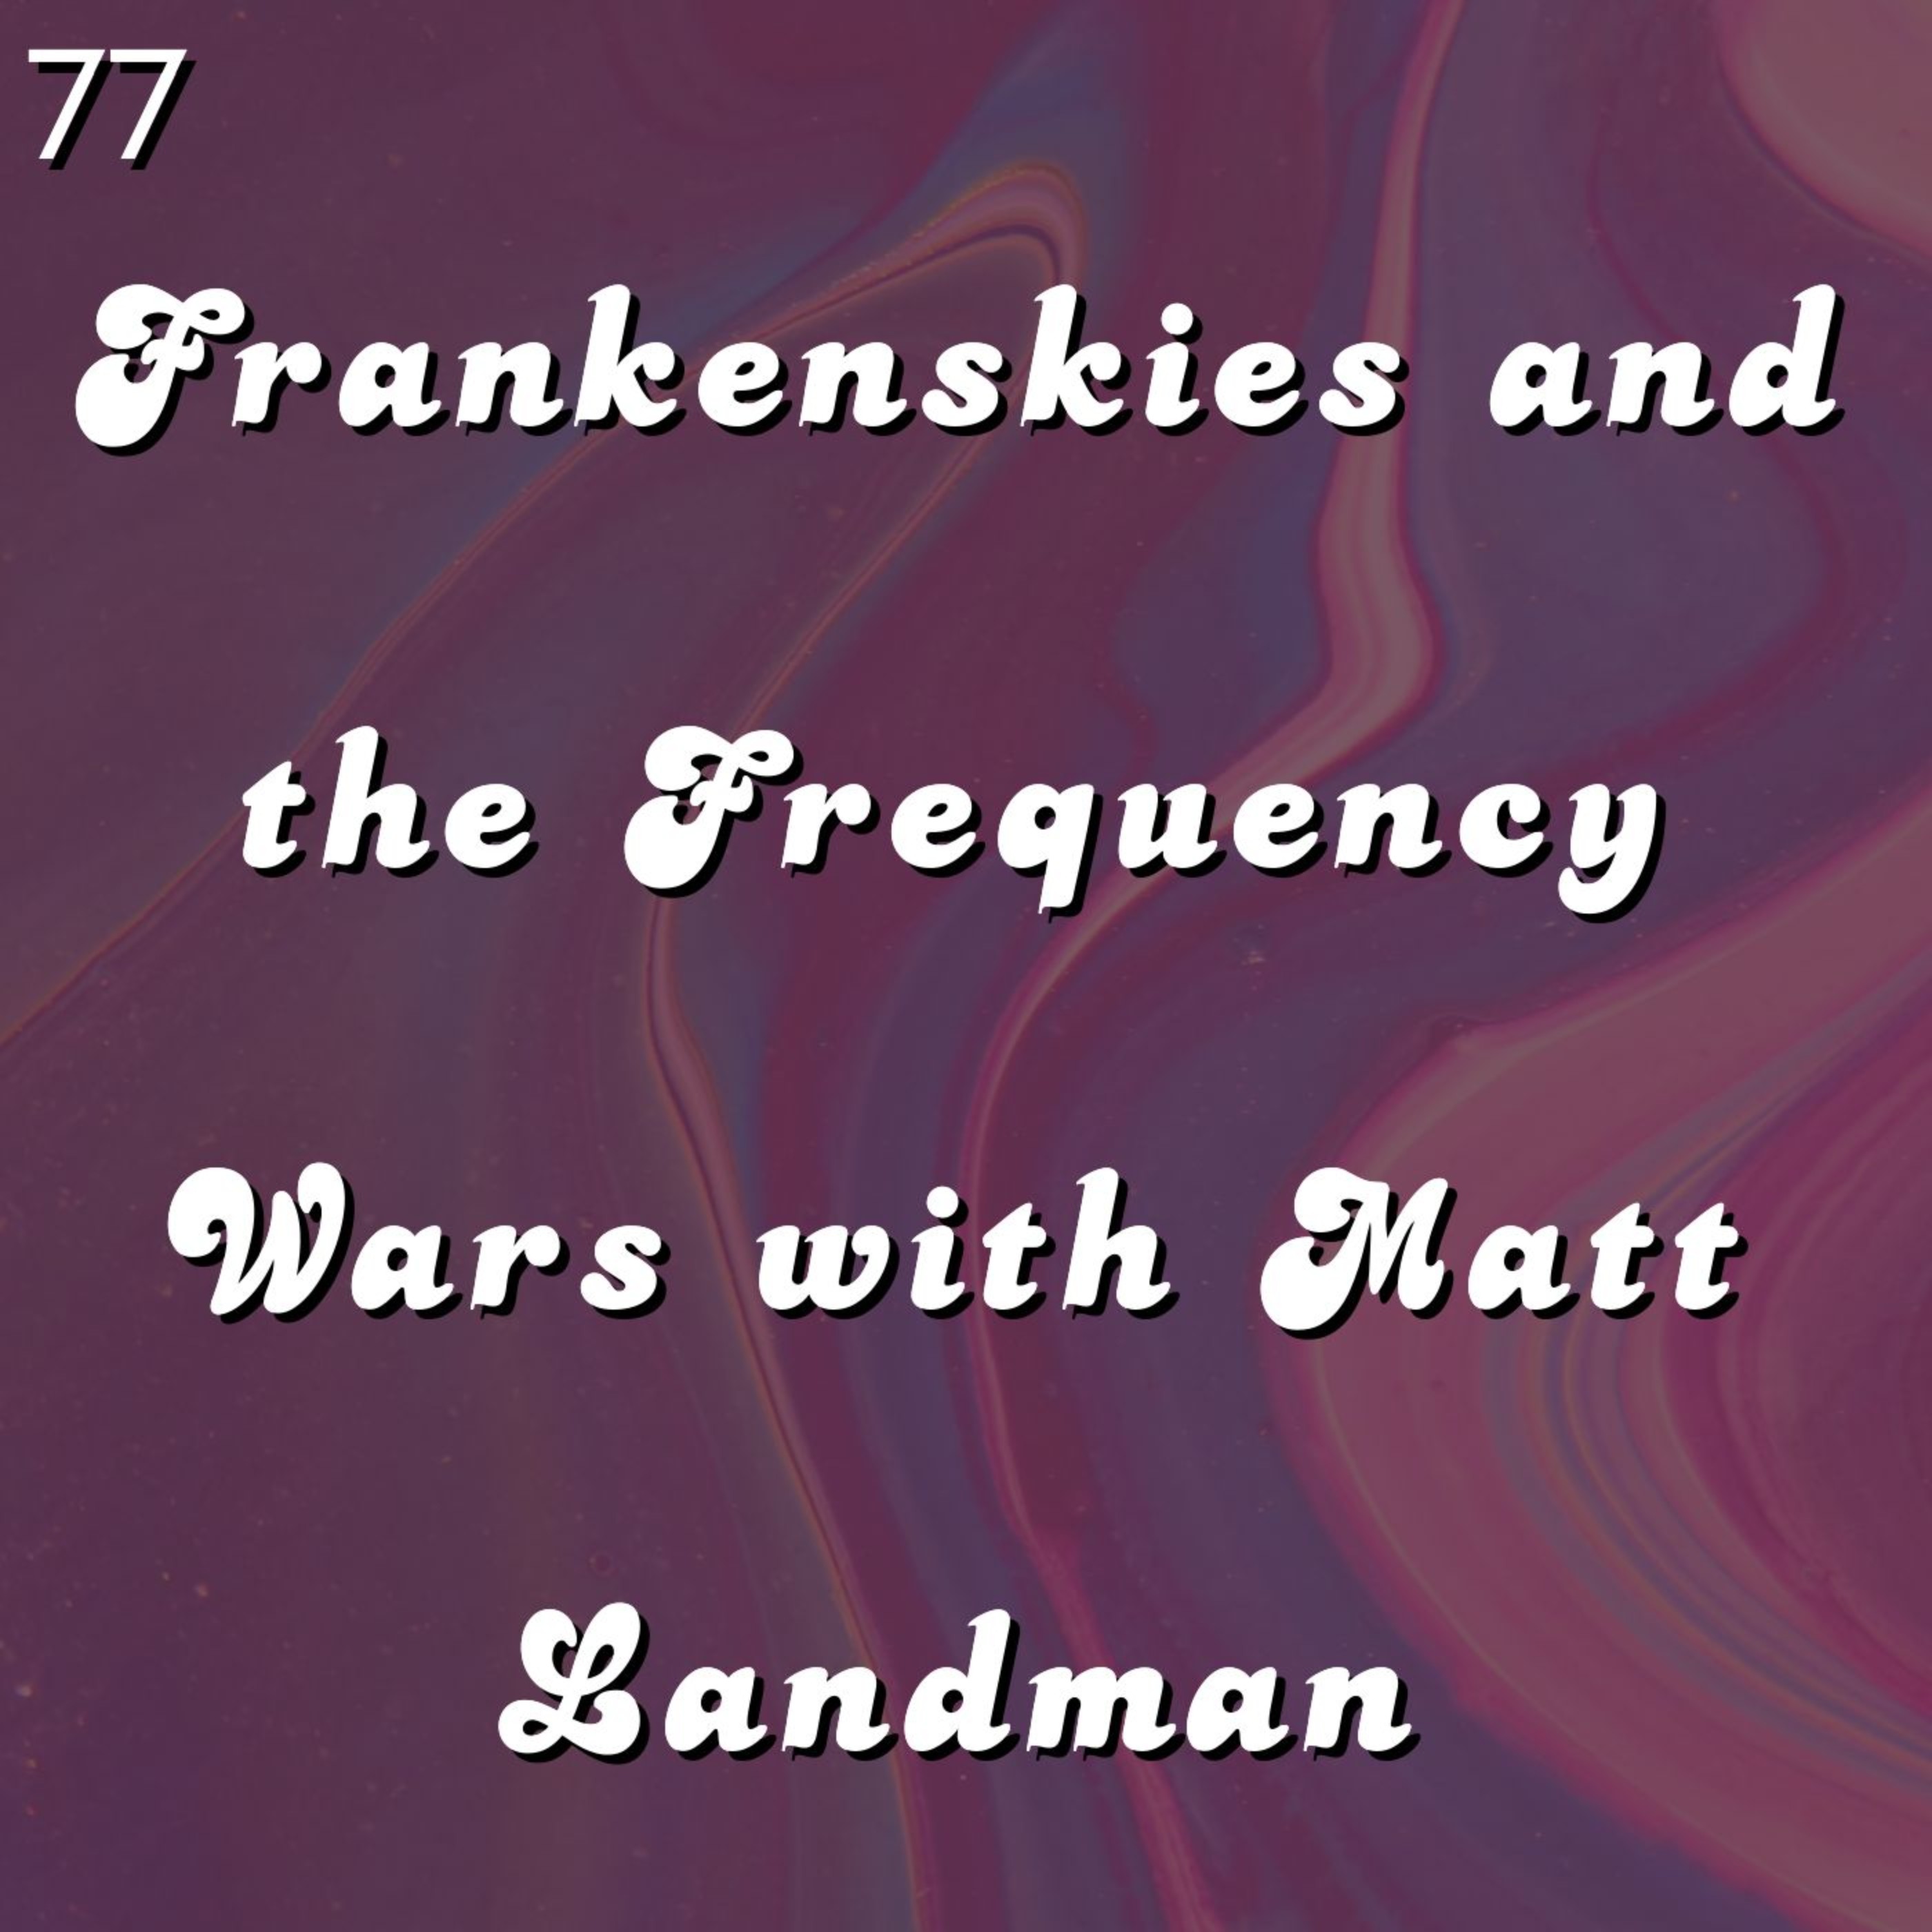 #77 - Frankenskies and the Frequency Wars with Matt Landman